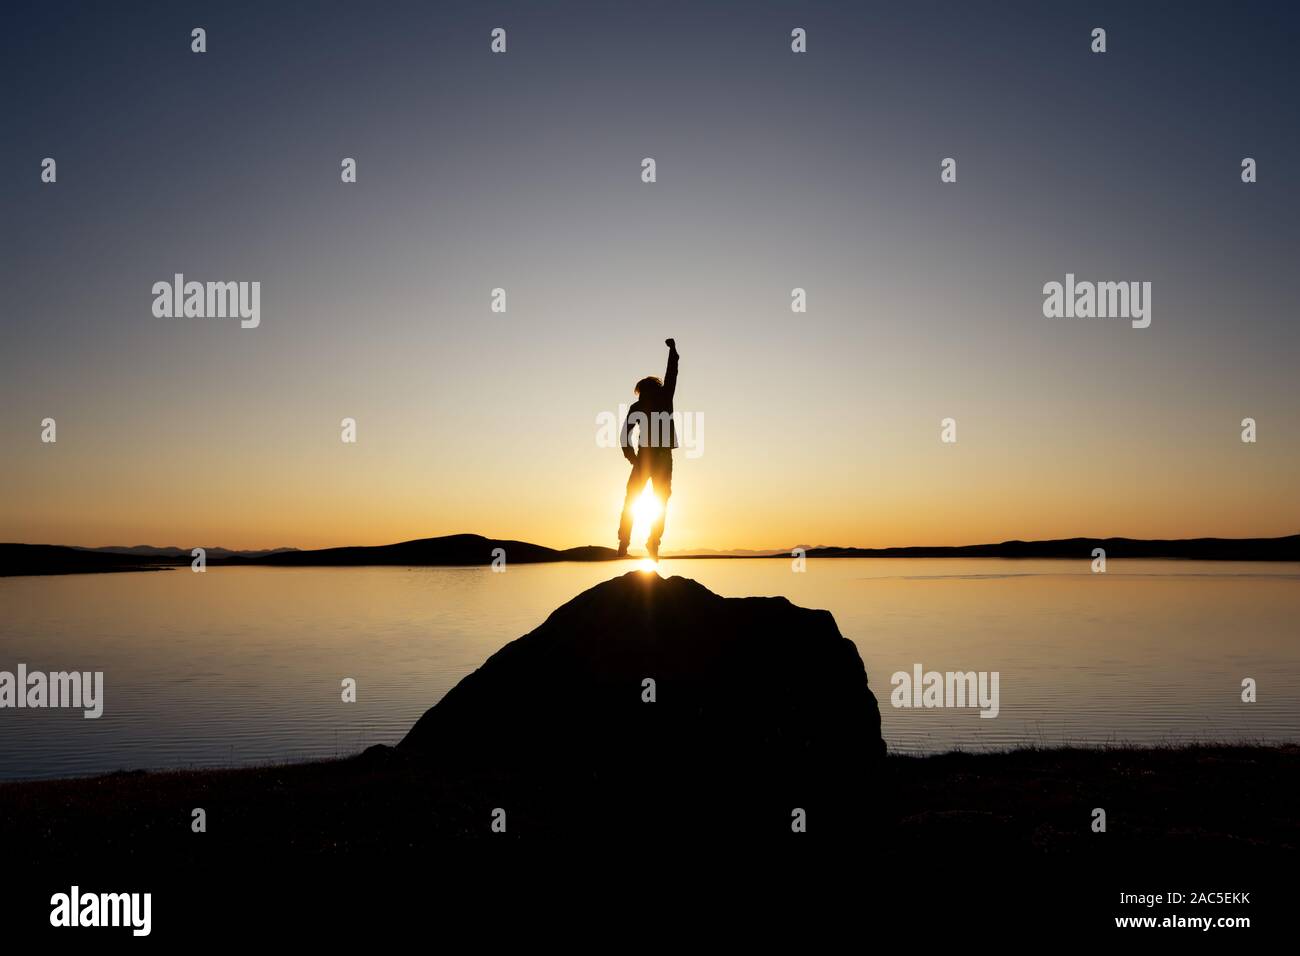 Man's silhouette jumps on big rock against sunset lake and mountains Stock Photo